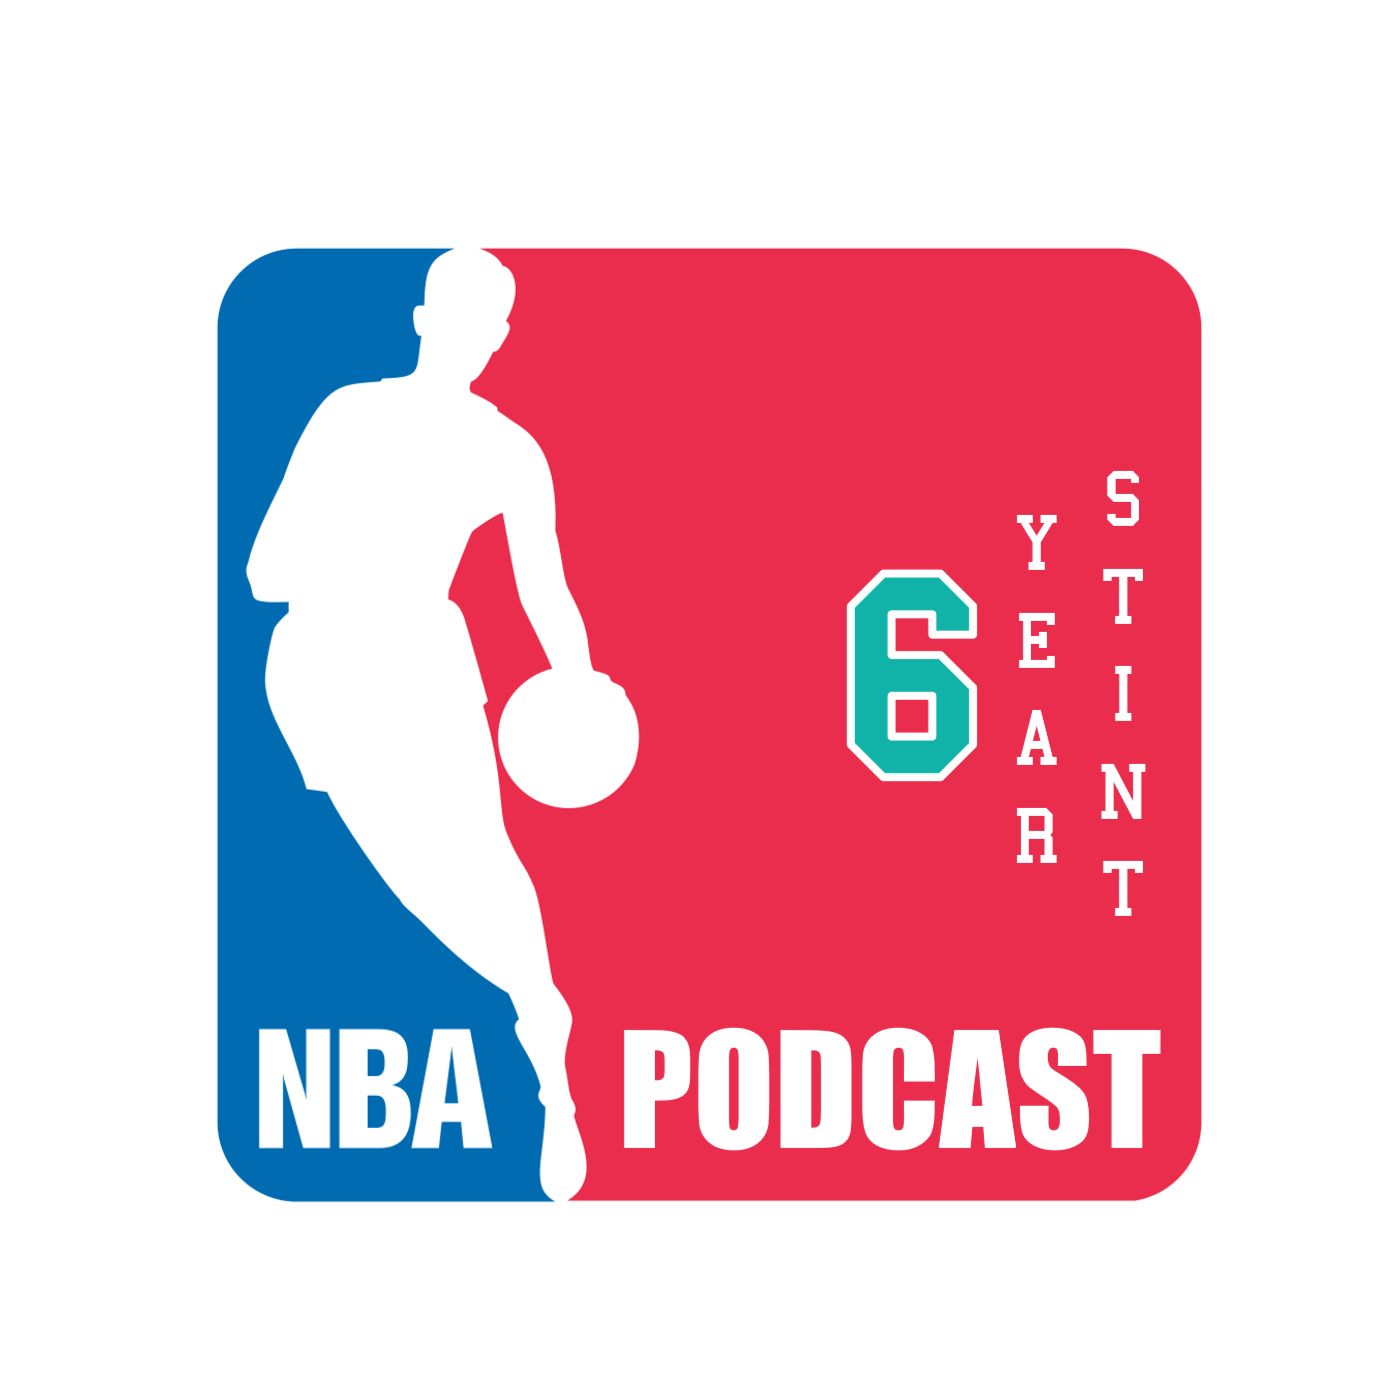 Stream NBA Generalist Podcast Listen to podcast episodes online for free on SoundCloud